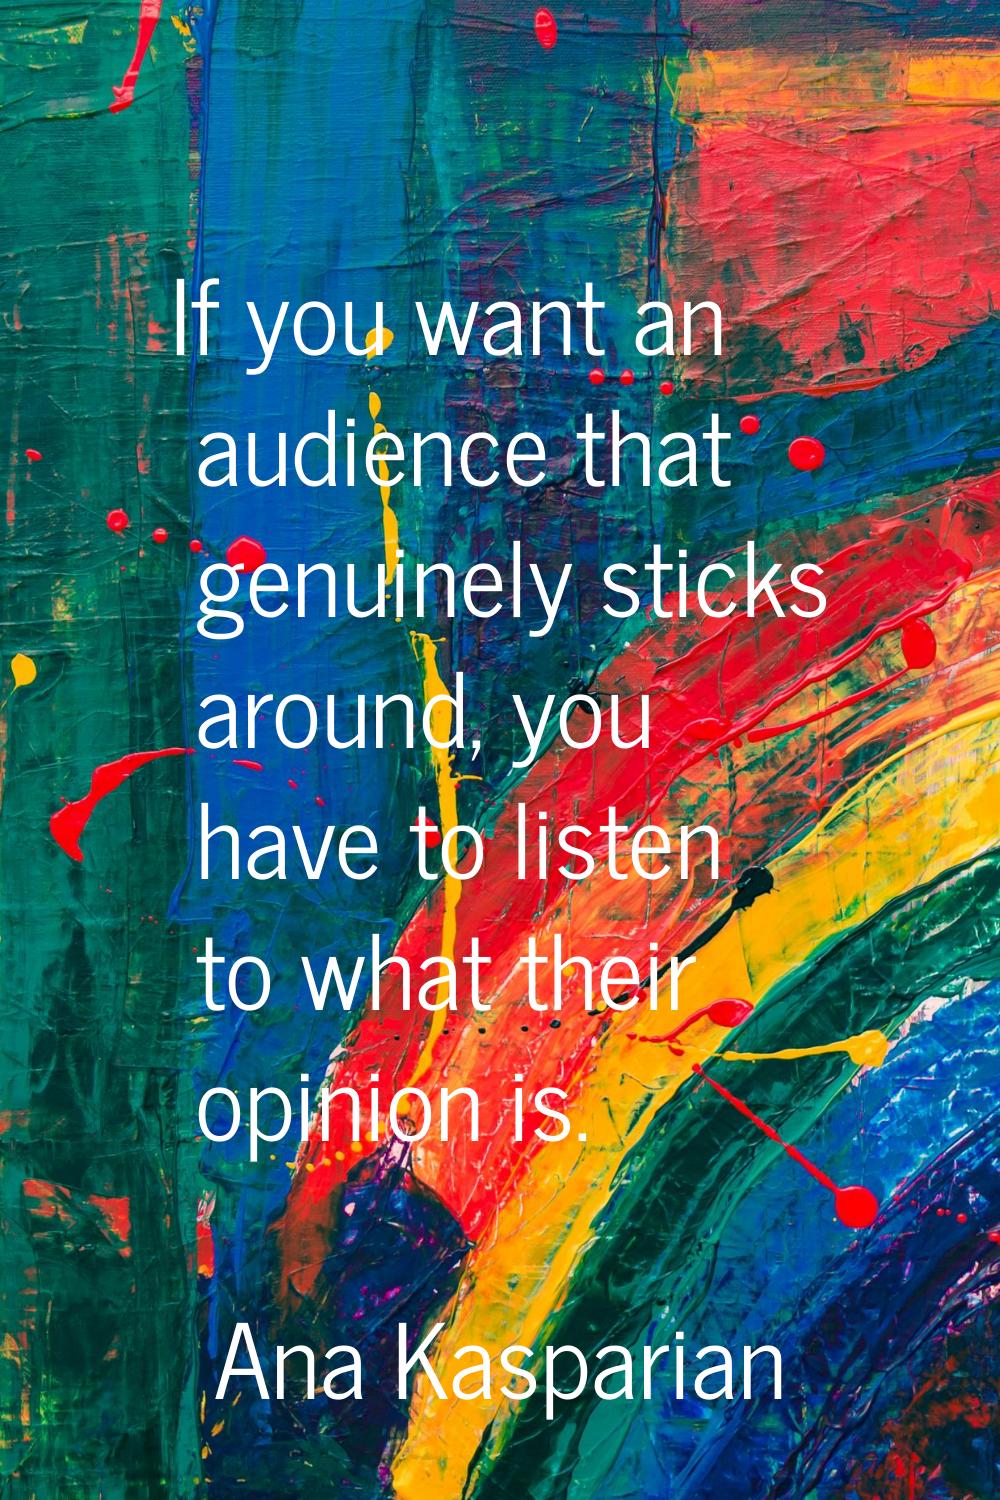 If you want an audience that genuinely sticks around, you have to listen to what their opinion is.